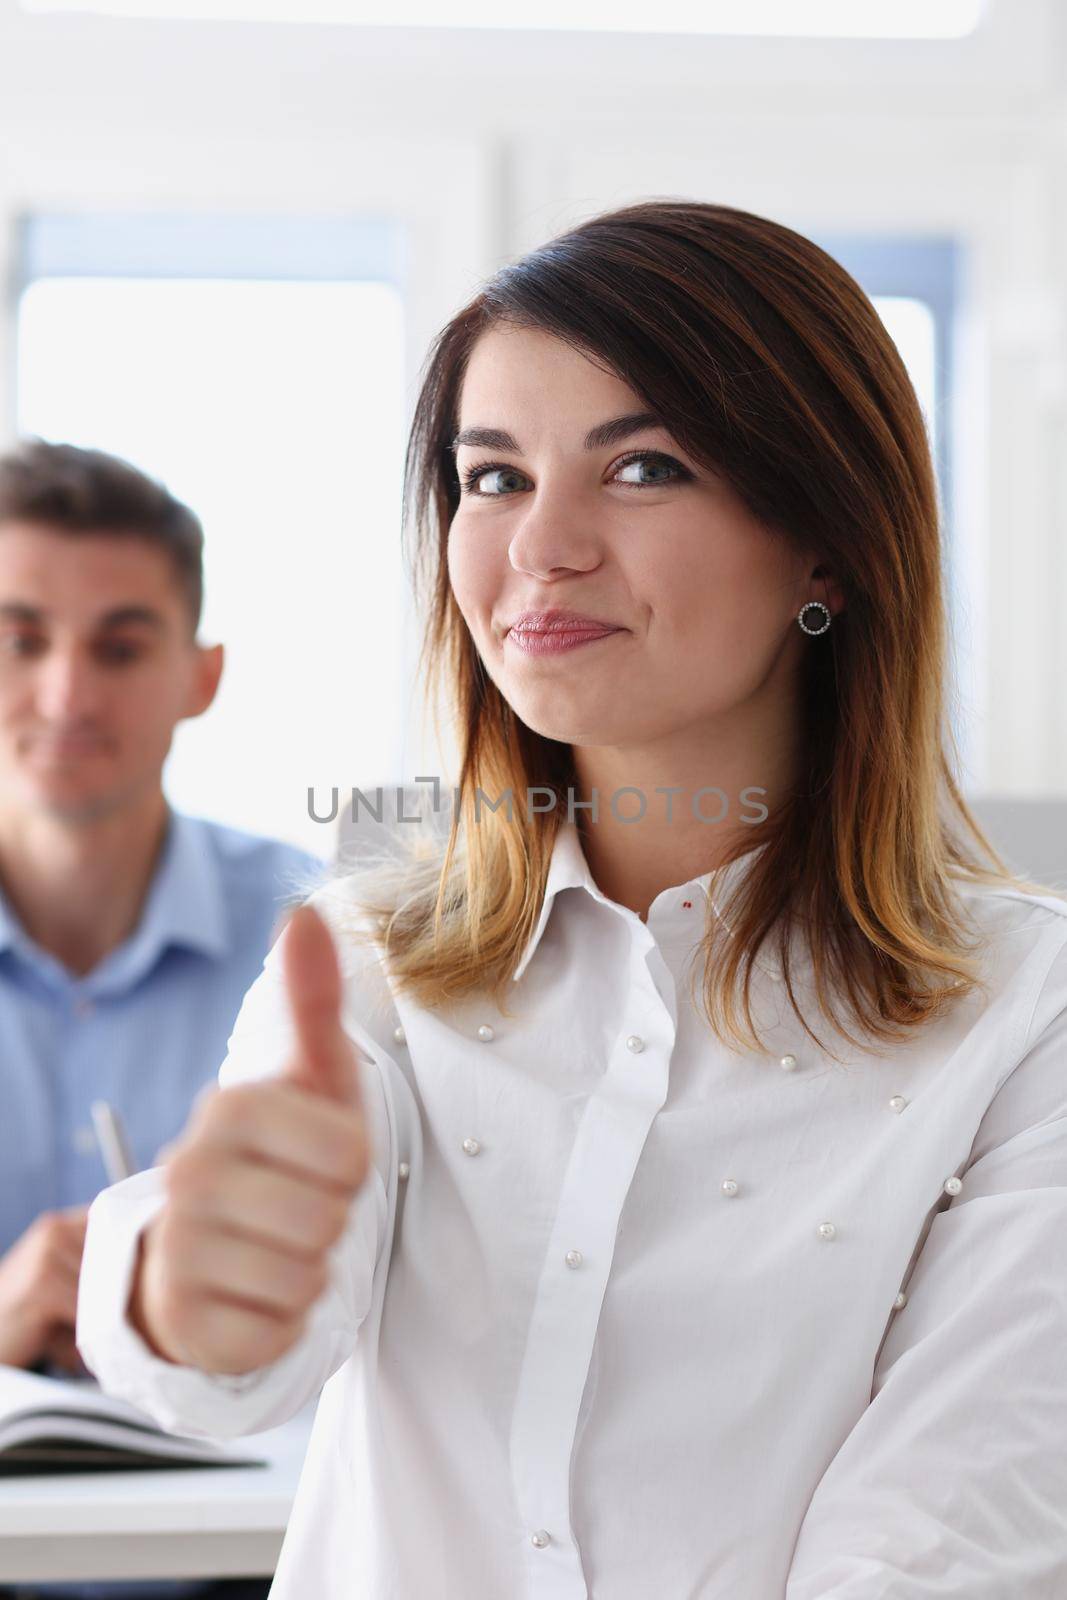 Female hand showing ok or approval sign with thumb up in creative people office during conference. High level and quality service job offer excellent education advisor serious business concept okay